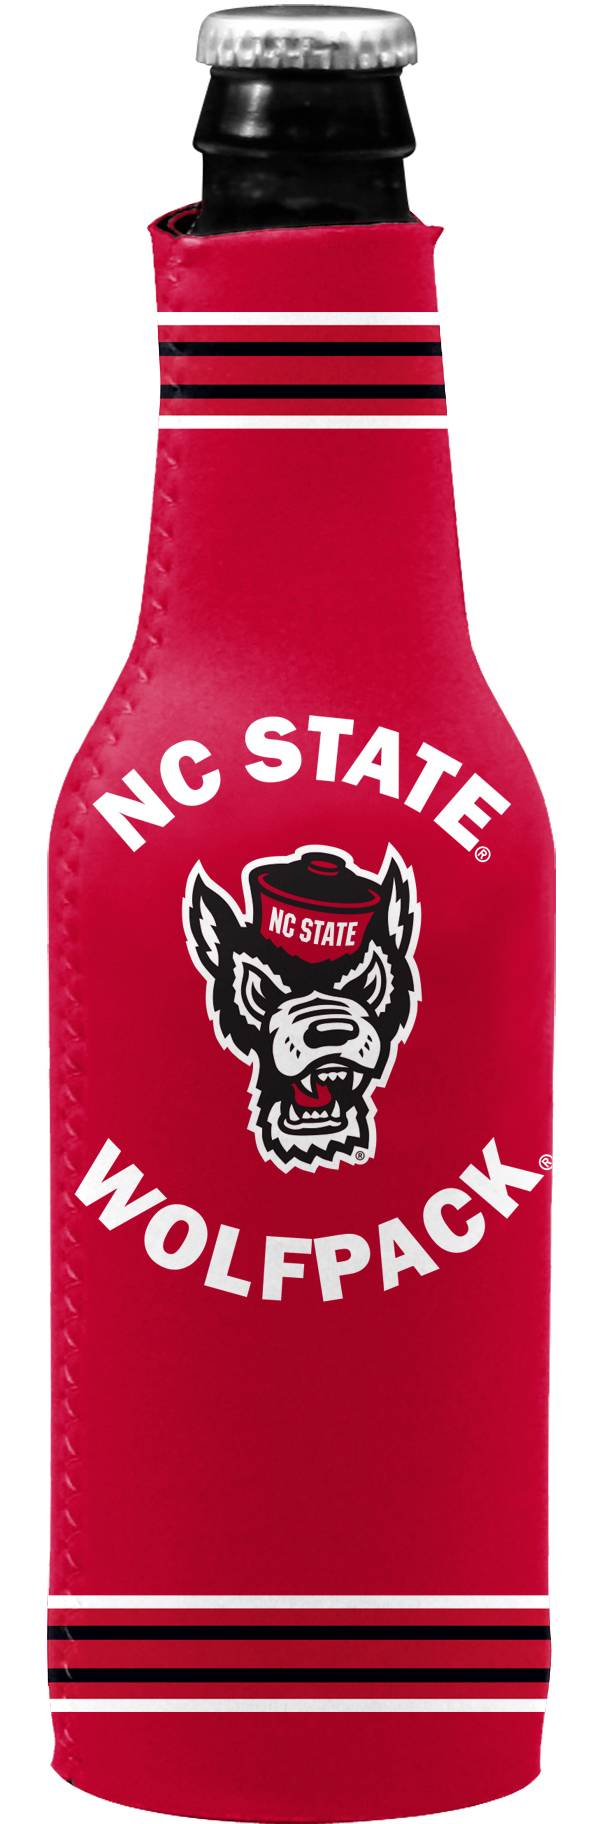 NC State Wolfpack Bottle Koozie product image